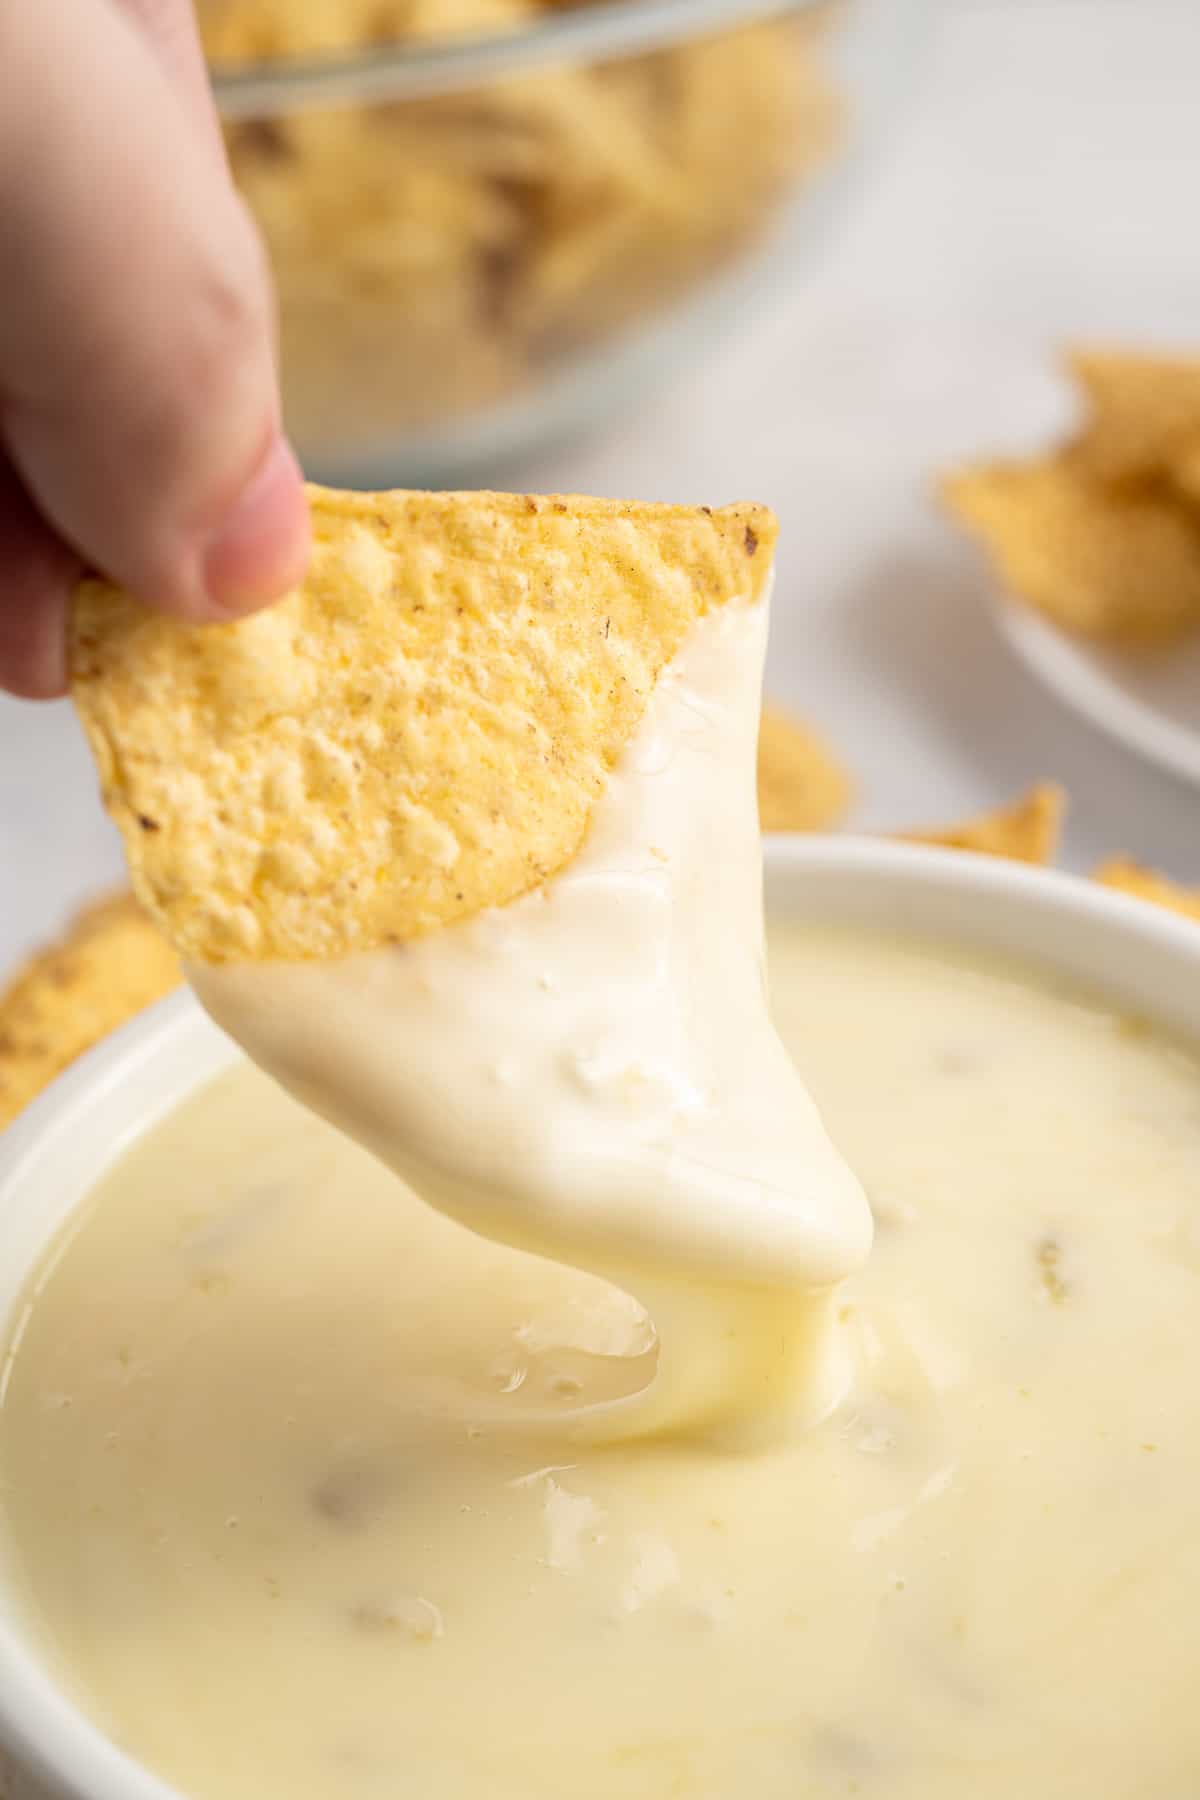 dipping a chip into queso blanco